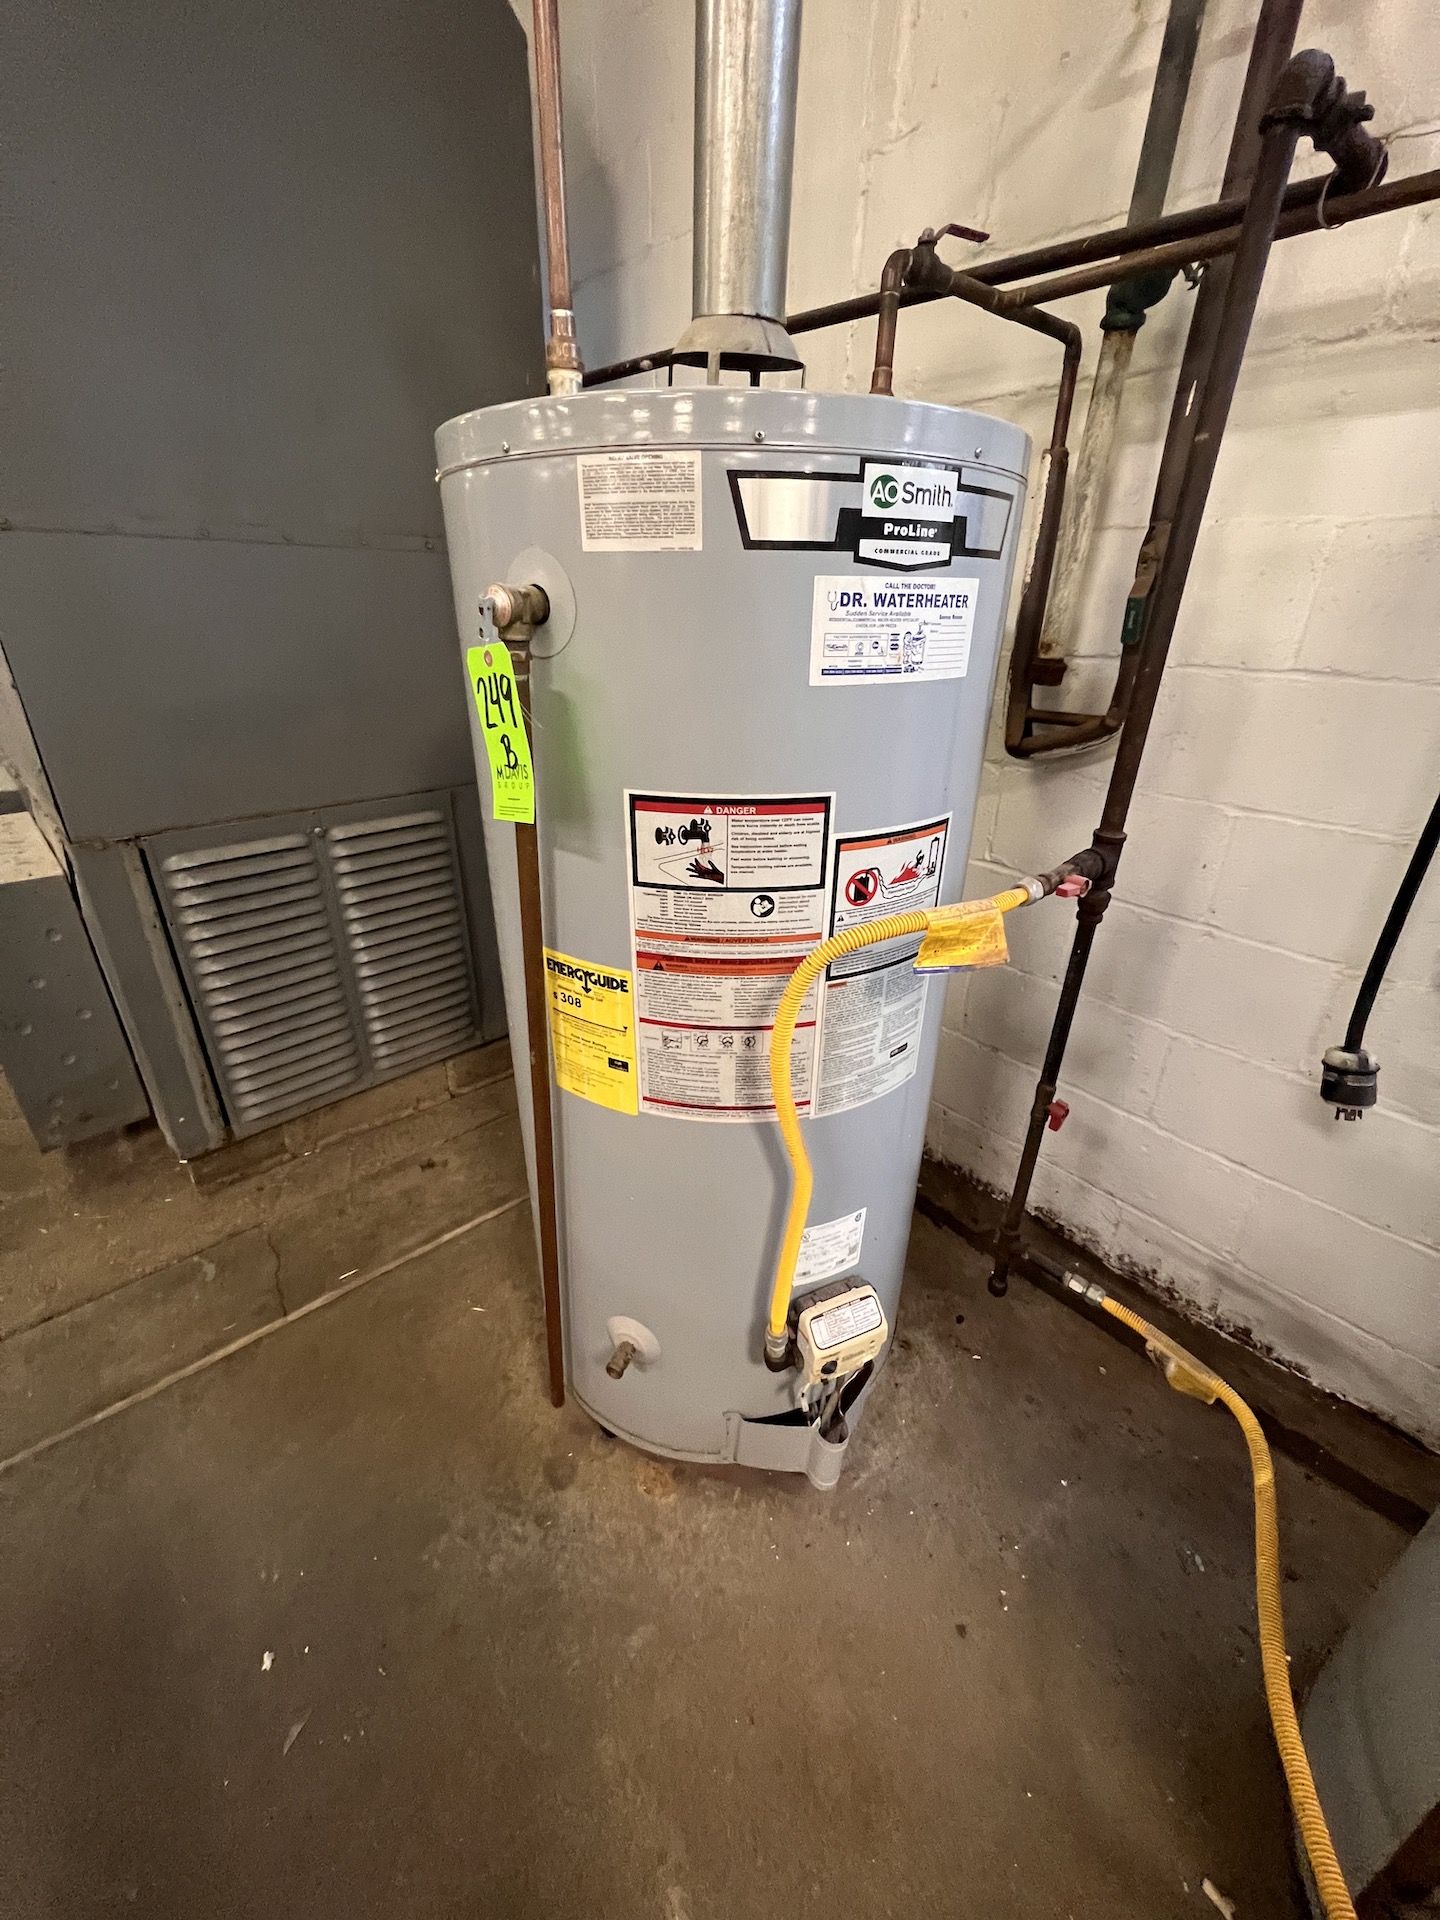 2019 AC SMITH NATURAL GAS WATER HEATER, MODEL FCG-75 400, S/N 100279887